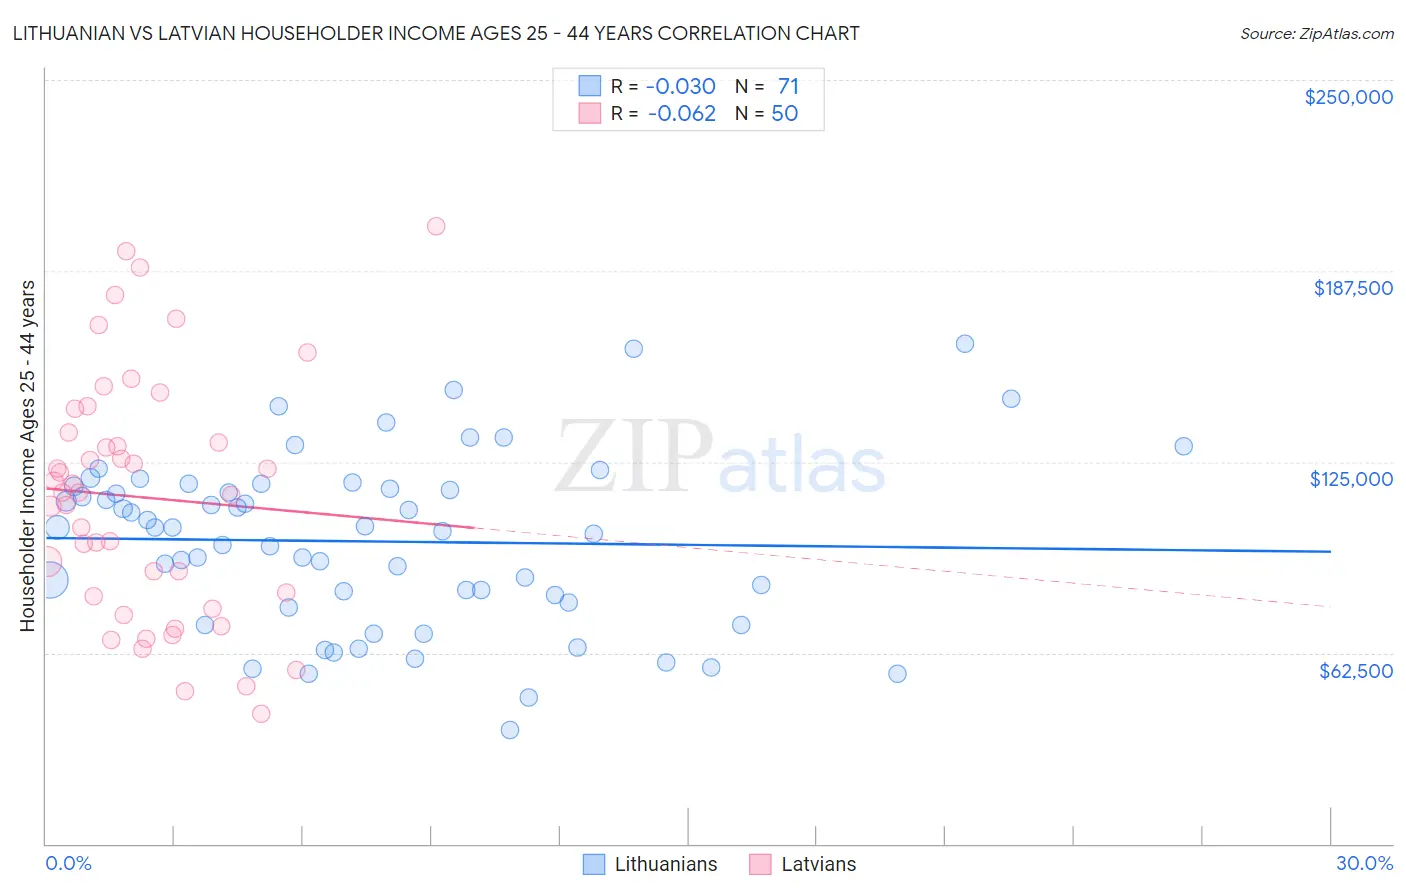 Lithuanian vs Latvian Householder Income Ages 25 - 44 years